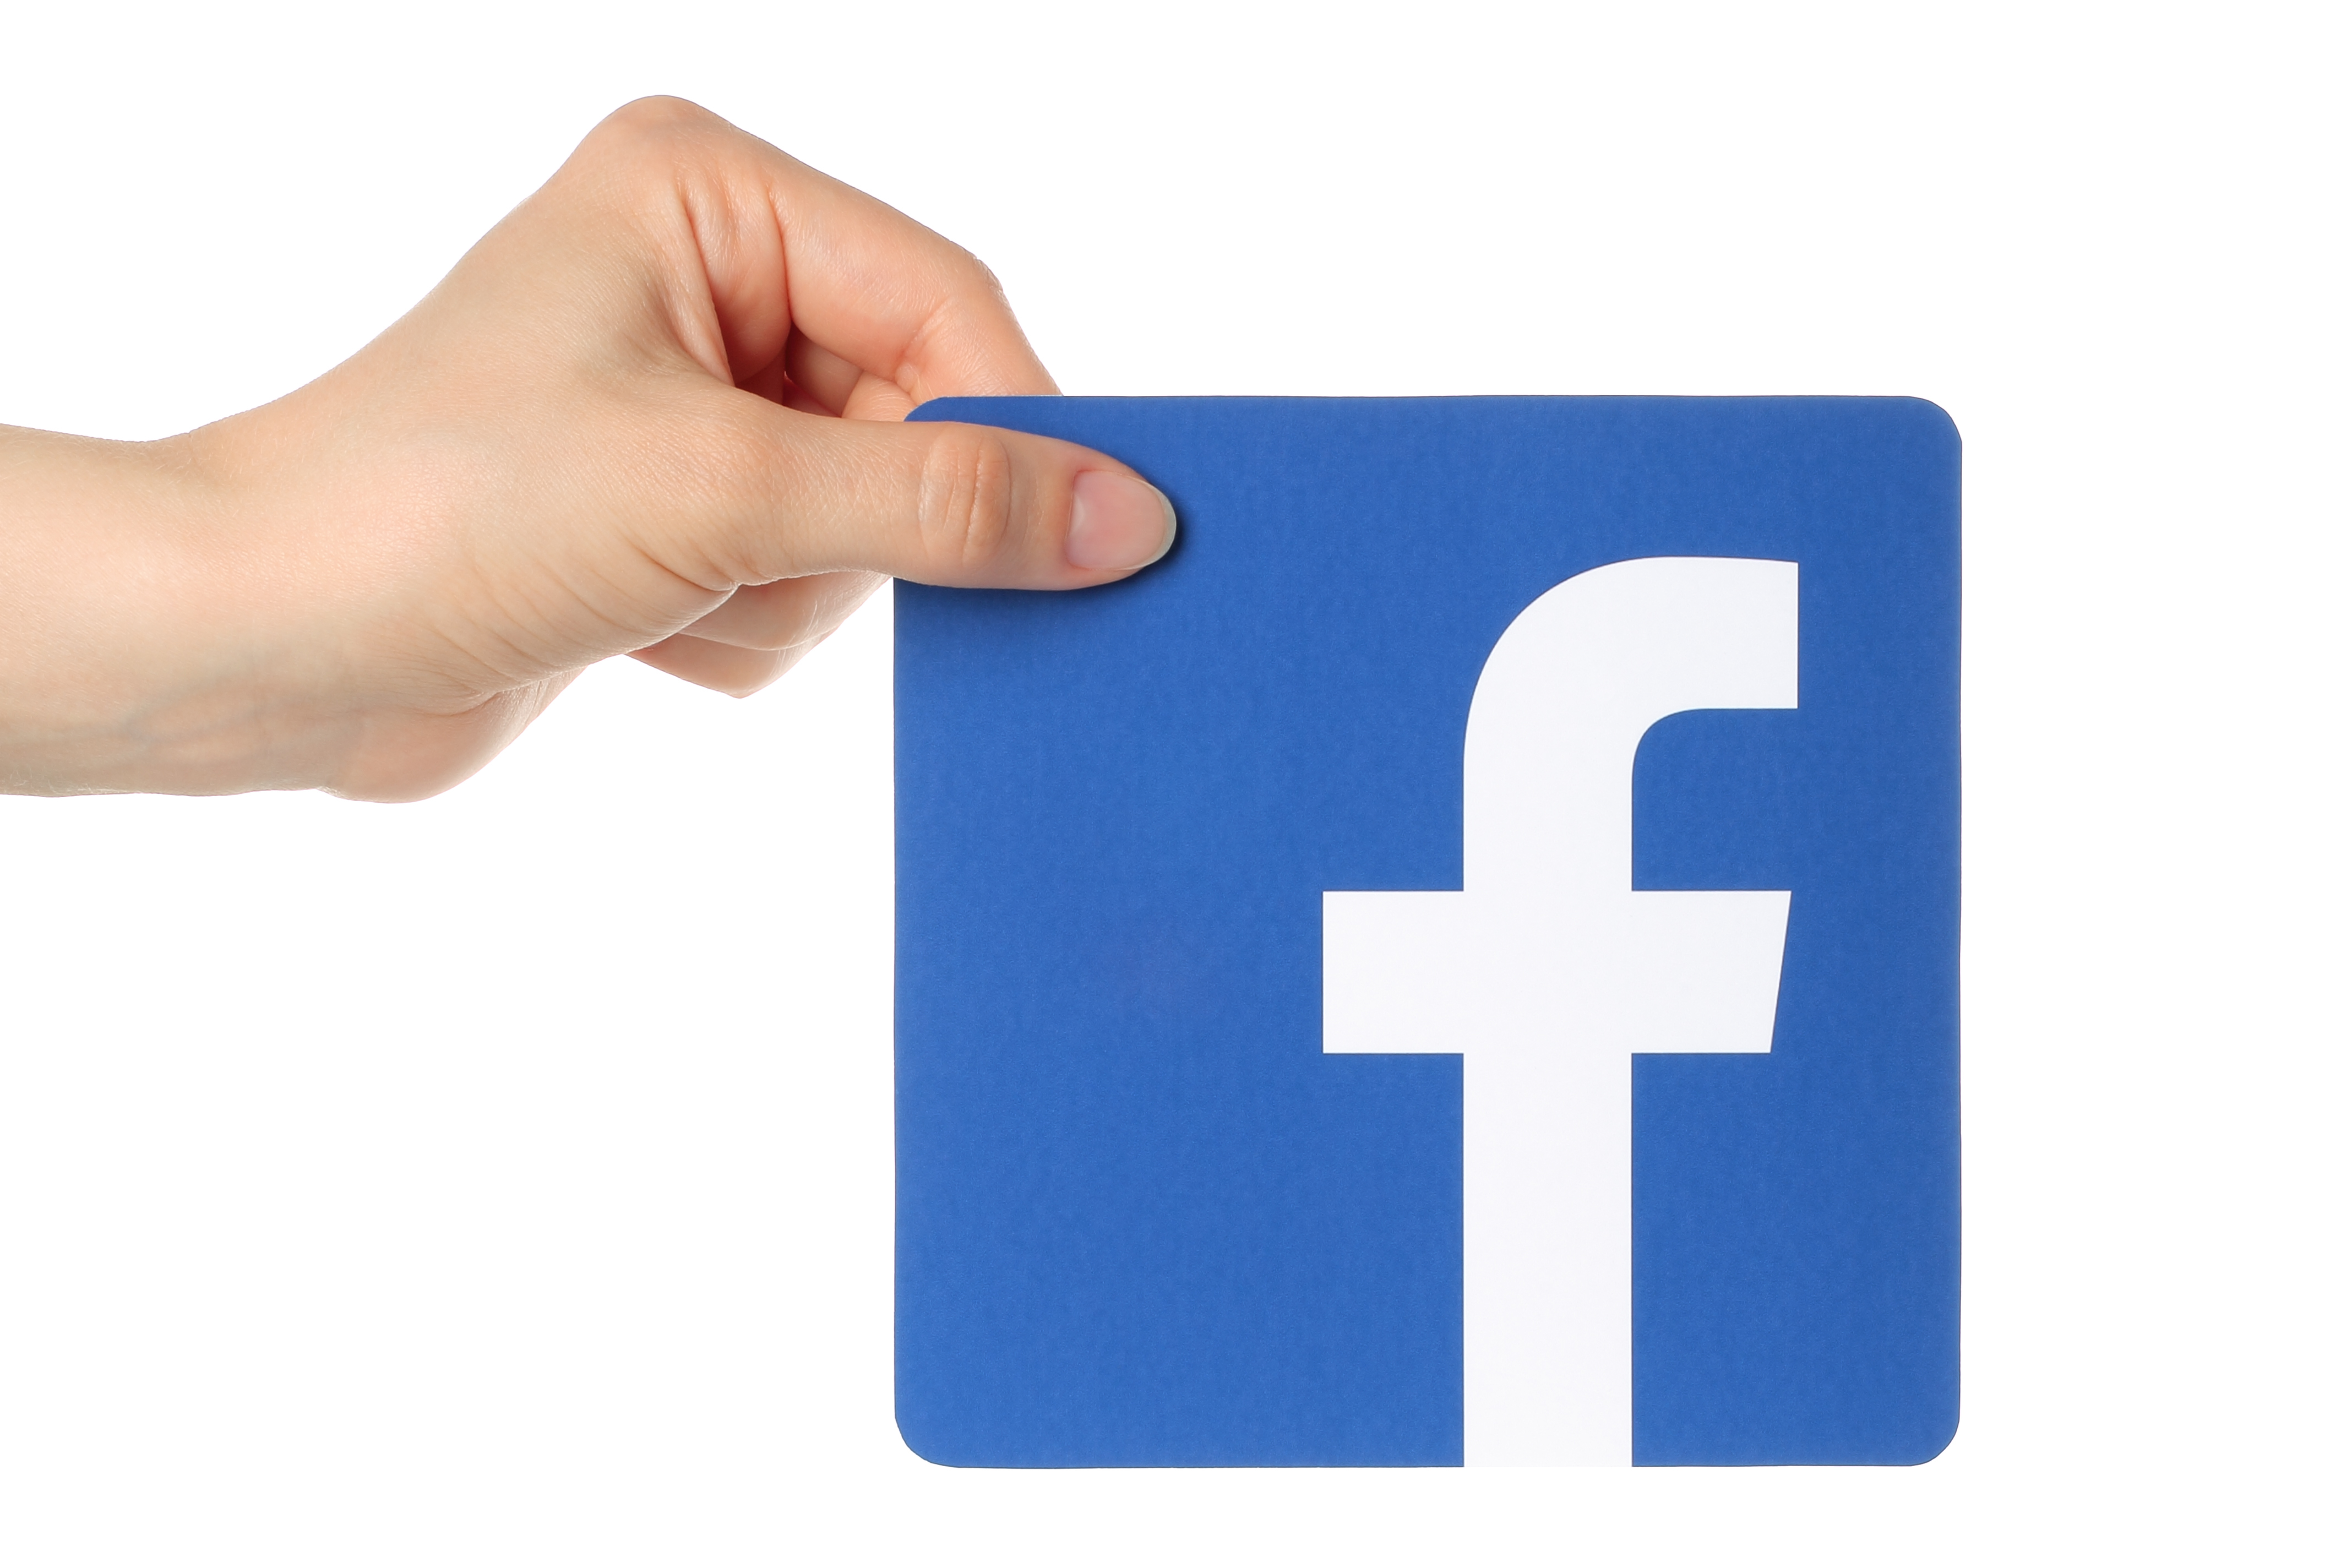 KIEV UKRAINE - APRIL 30 2015: Hand holds facebook logo printed on paper on white background. Facebook is a well-known social networking service.